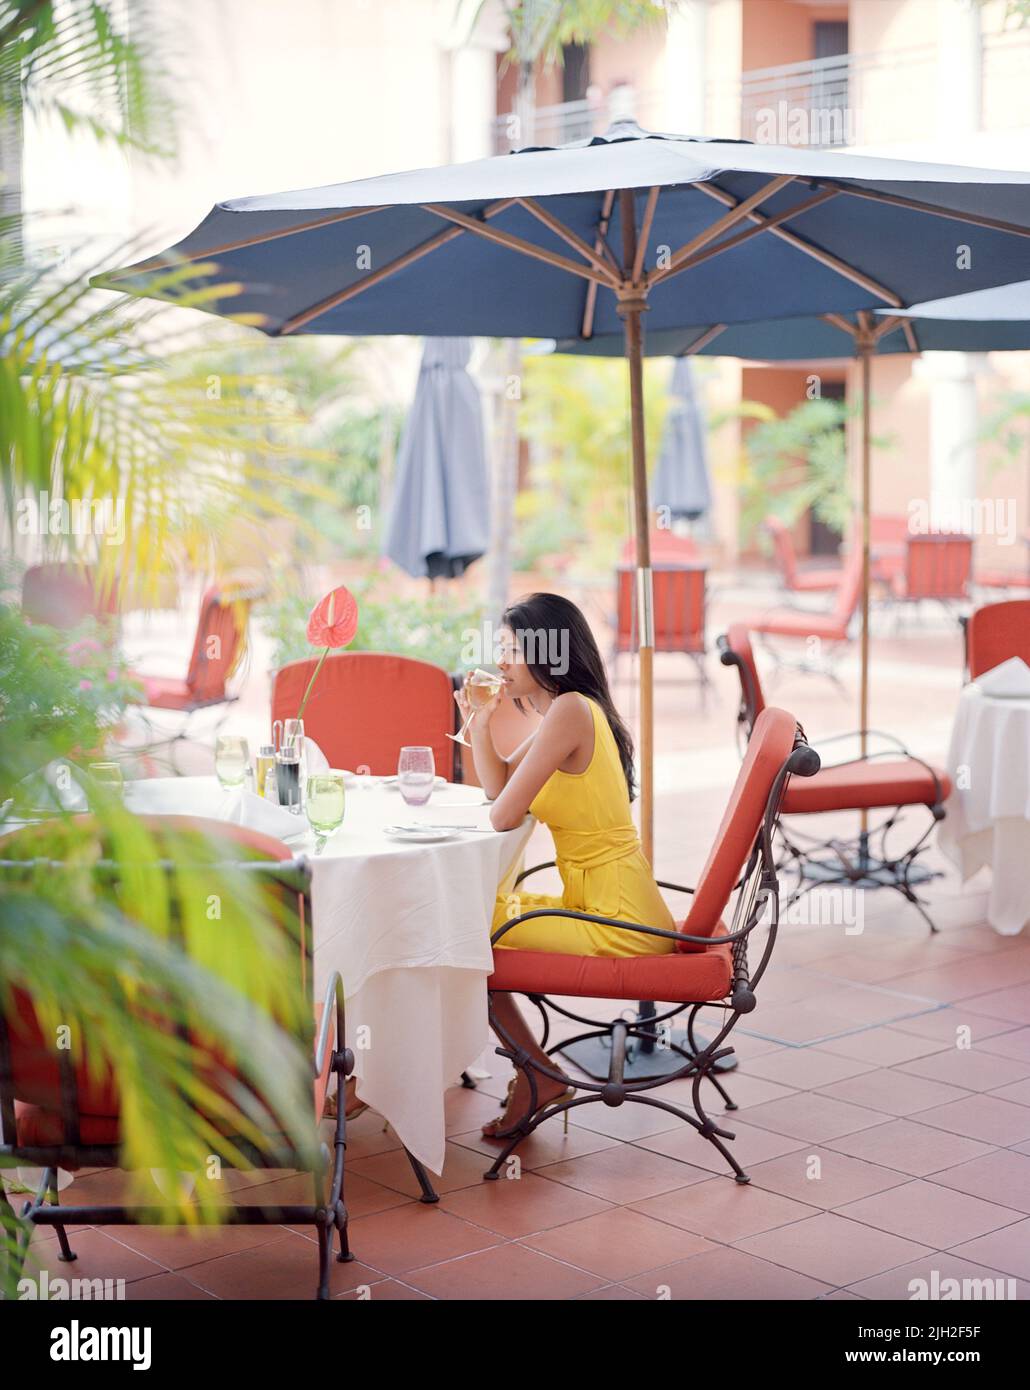 A woman wearing a Diane von Furstenberg dress has a glass of wine at a  restaurant. Santo Domingo, Dominican Republic. Stock Photo